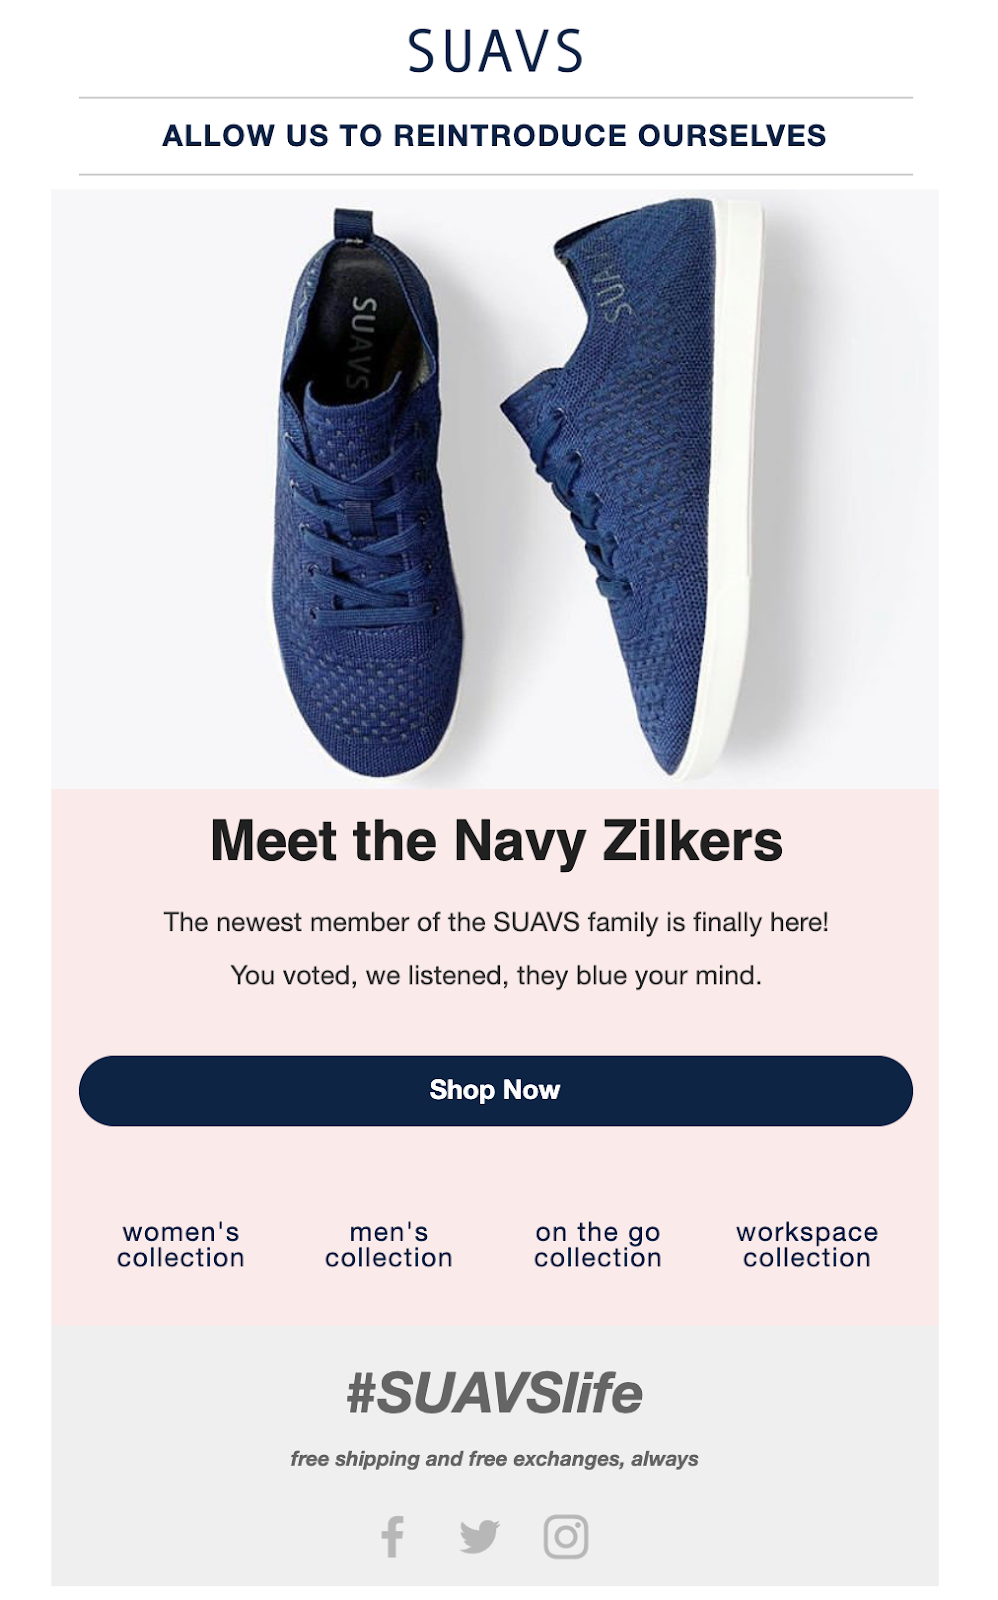 Screenshot of new product launch email by Suav Shoes